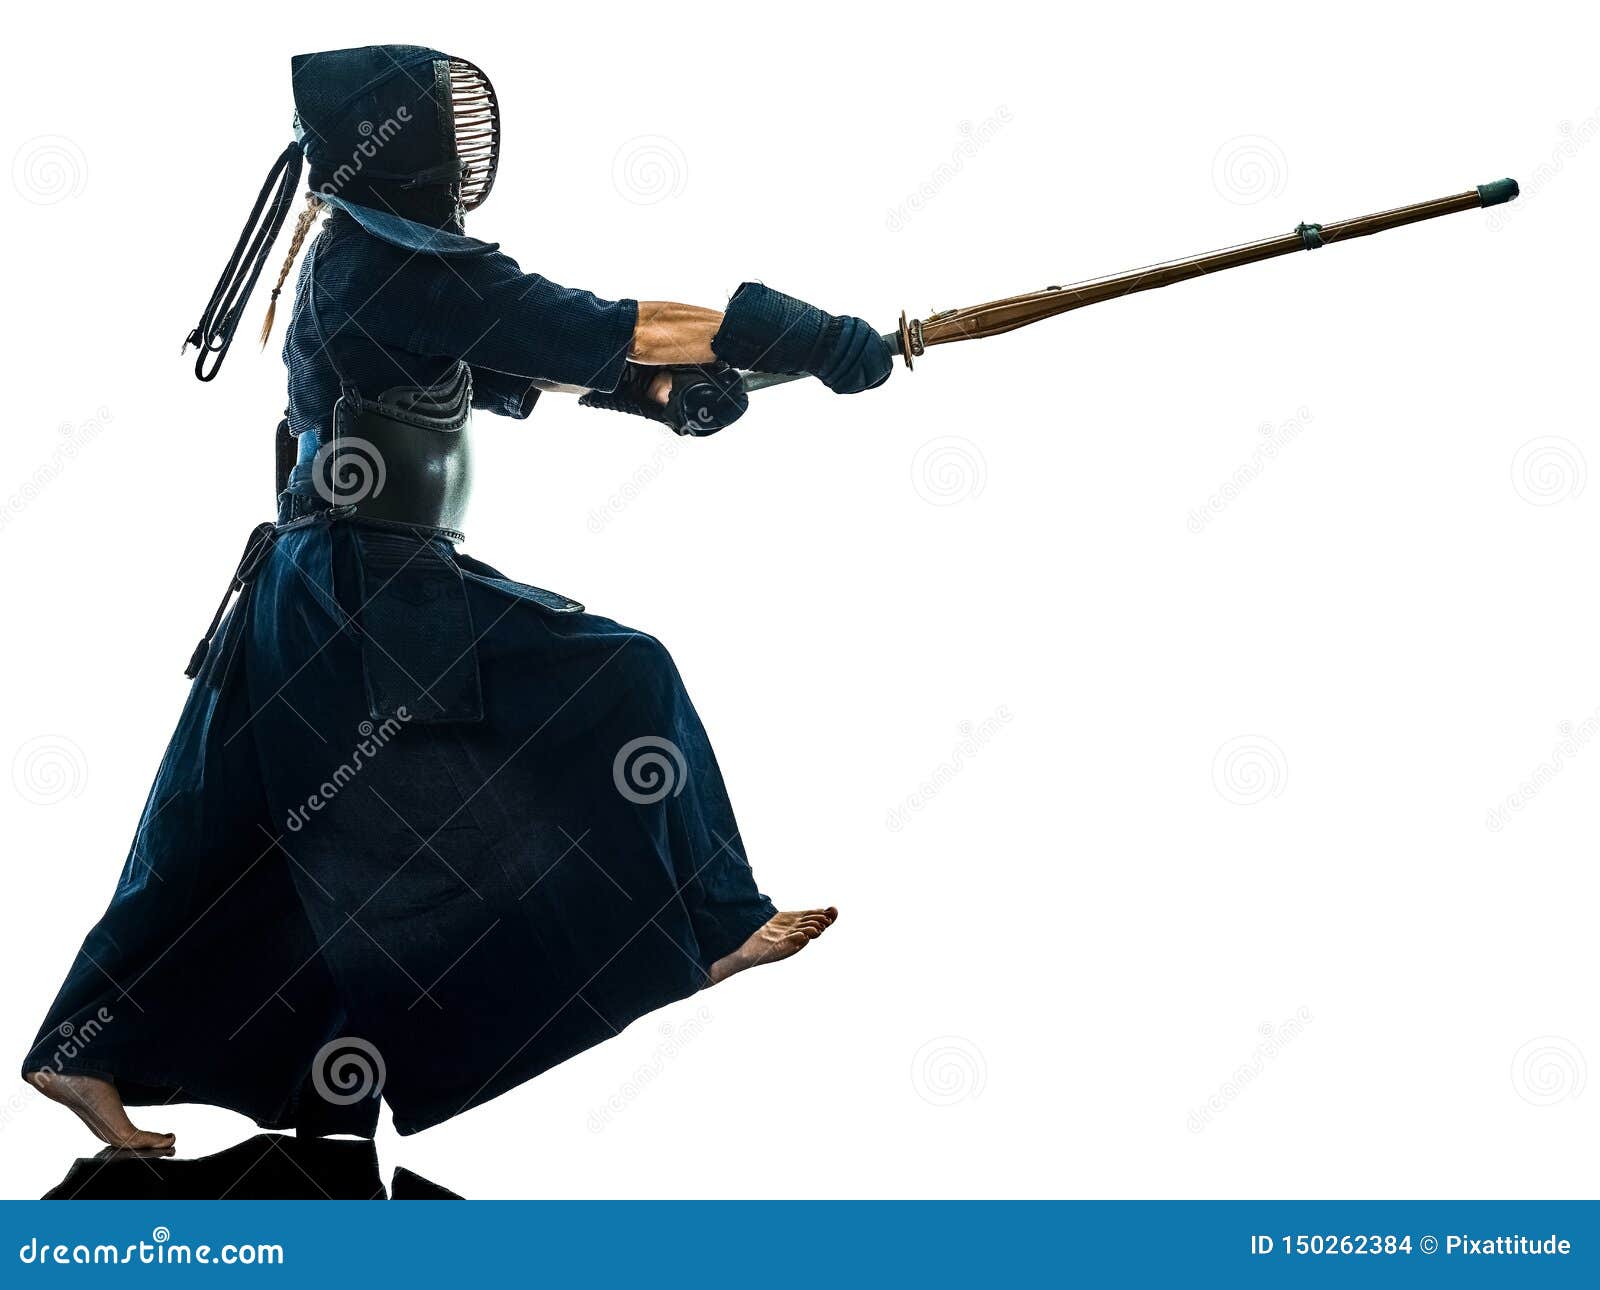 Kendo martial arts fighters woman silhouette isolated white bacg. Kendo martial arts fighters in silhouette isolated on white bacground the japanese script is the name of the fighter ,blank is for the beginners regarding rules